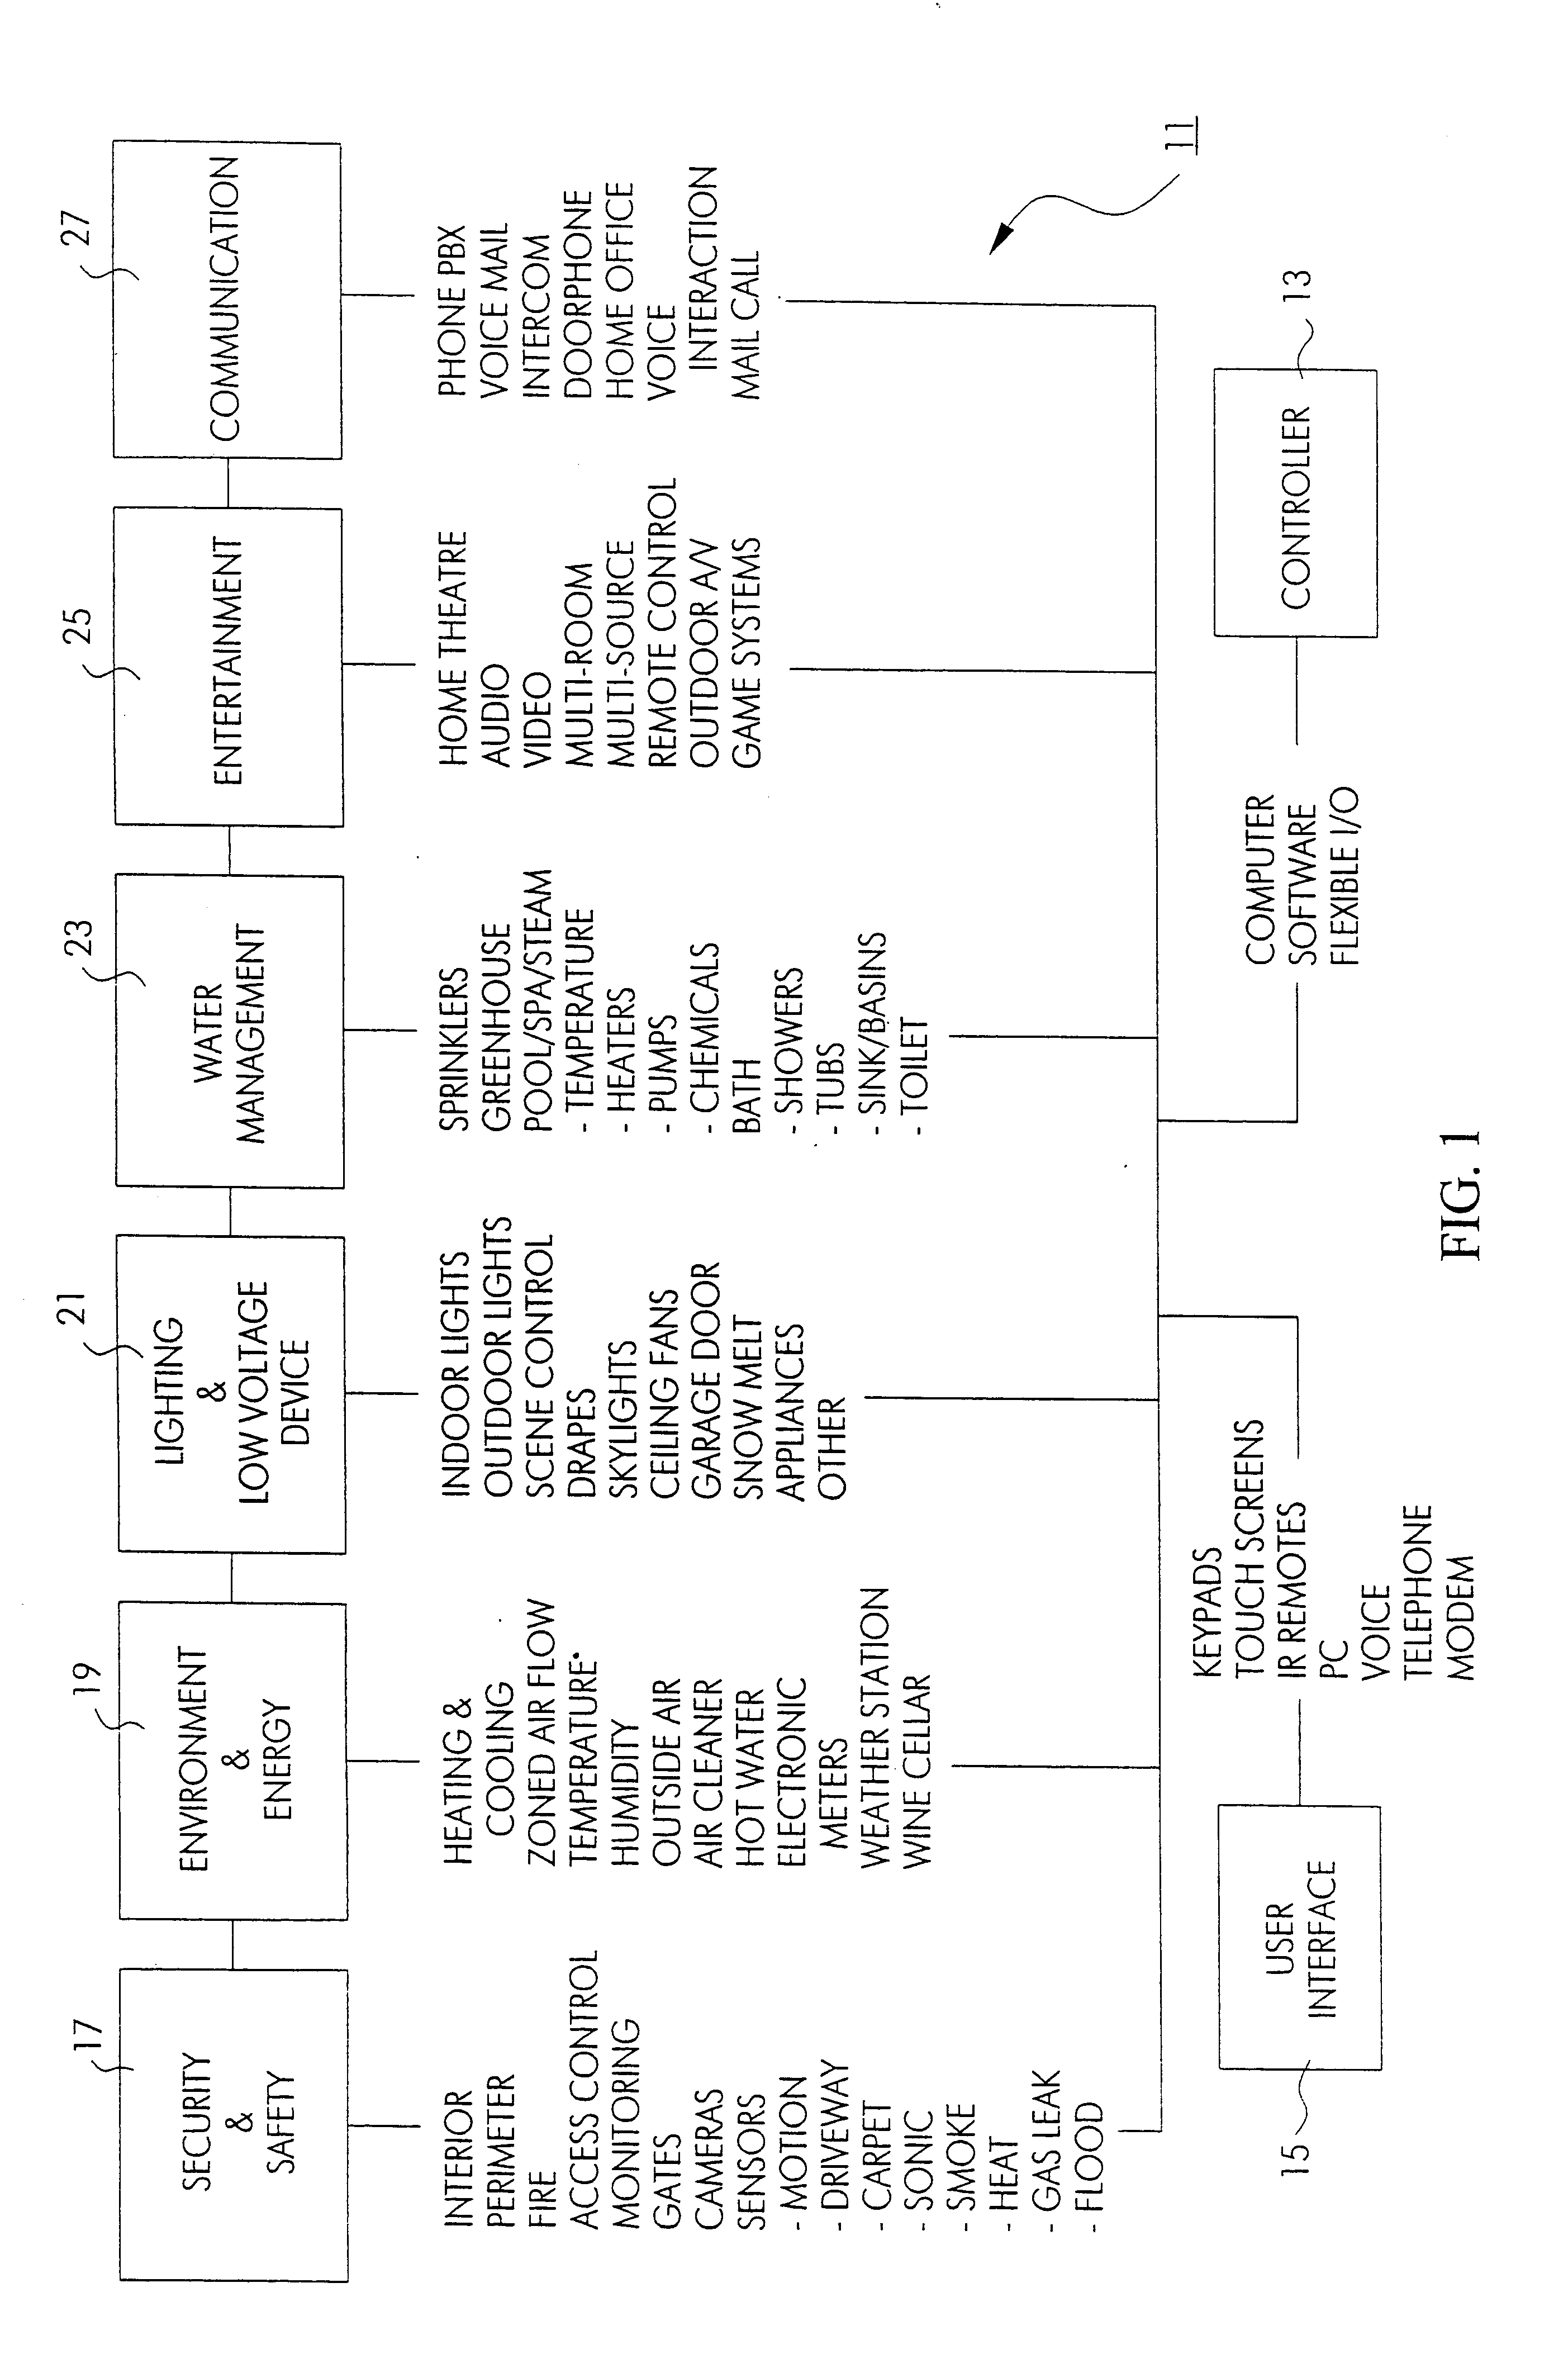 Method and apparatus for improved building automation